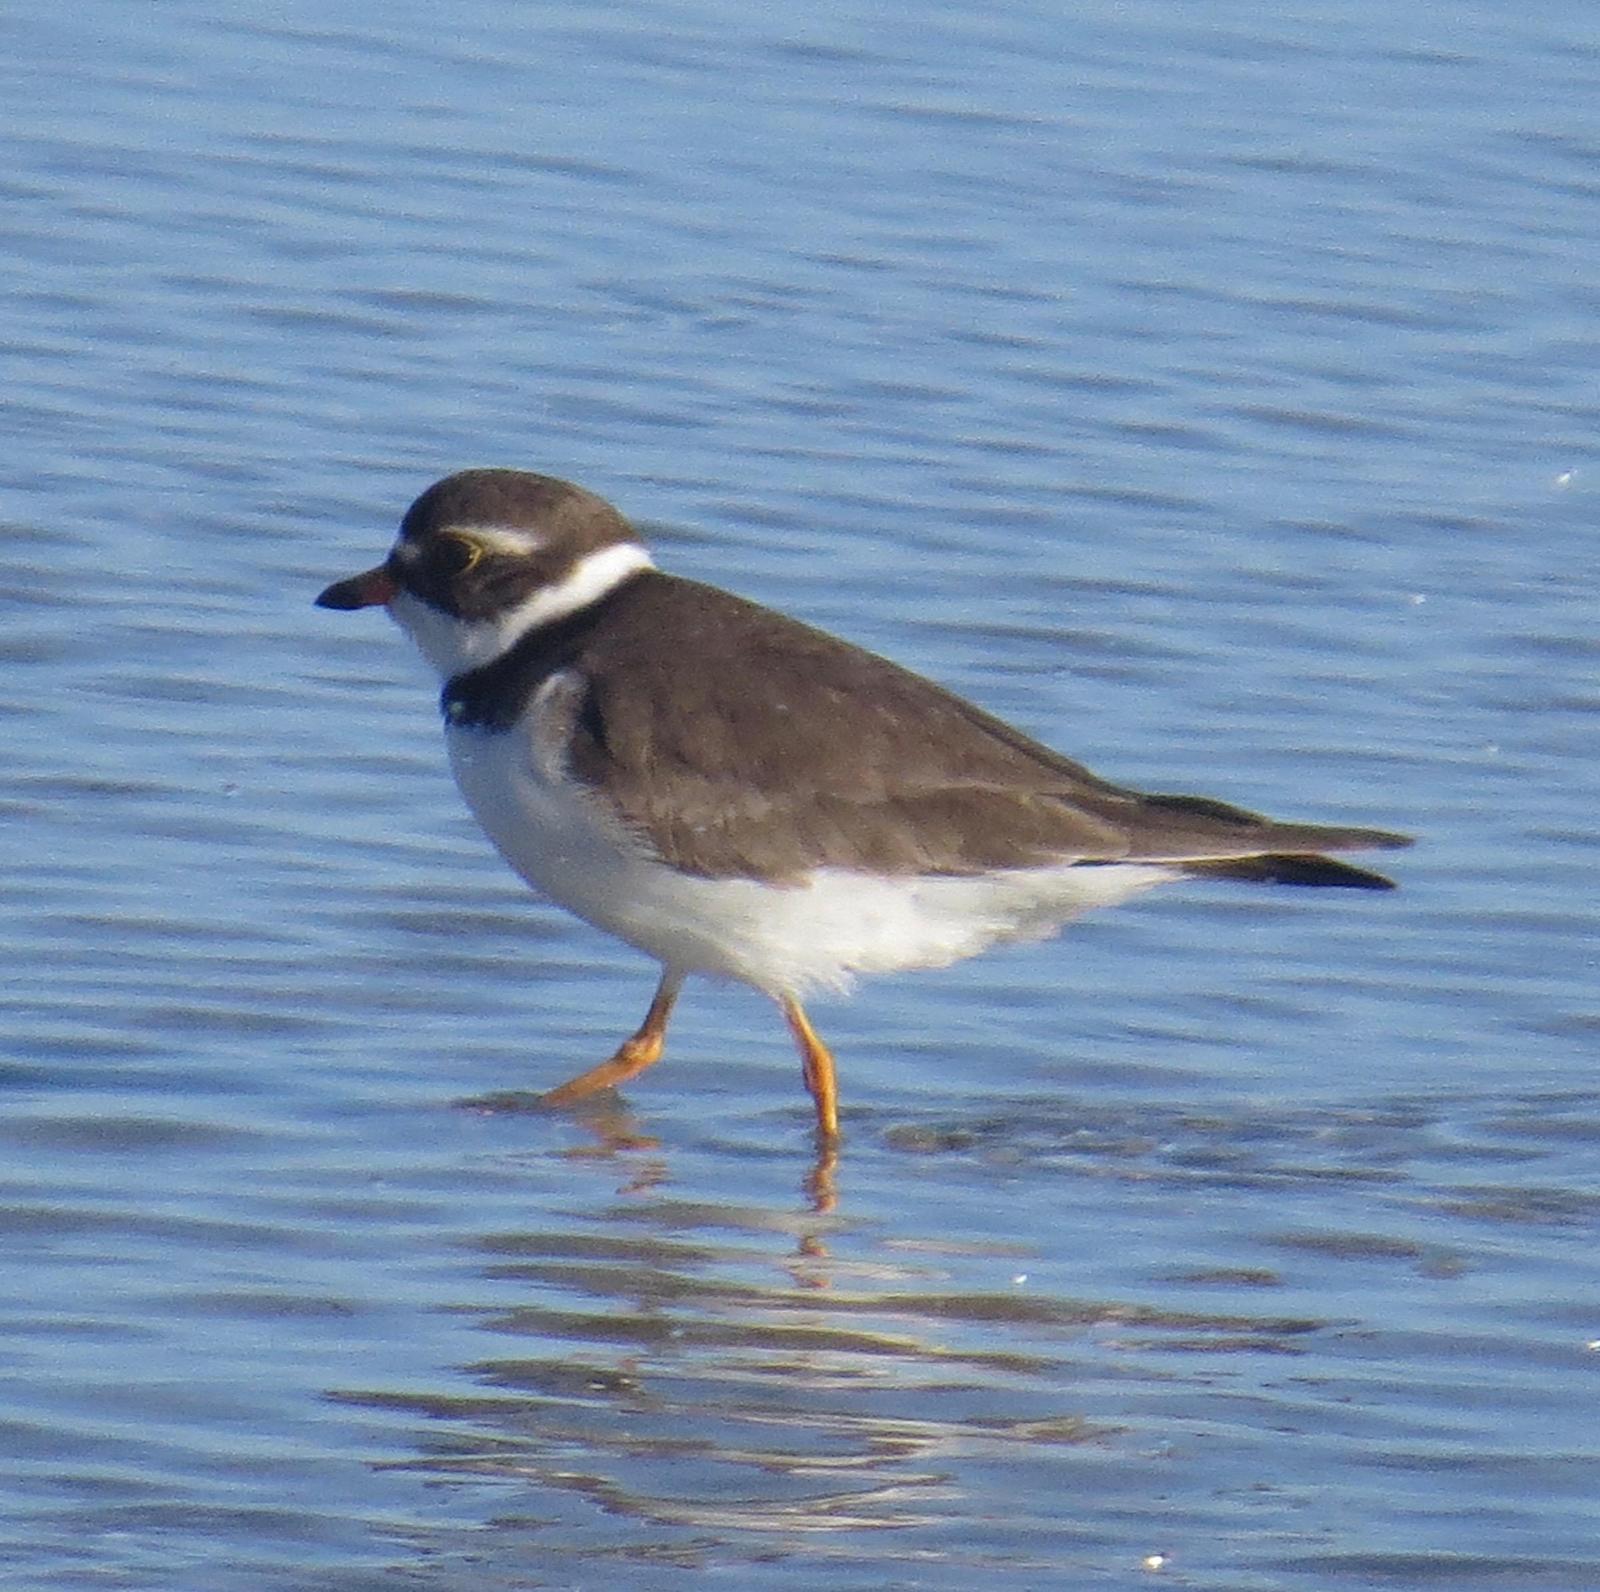 Semipalmated Plover Photo by Don Glasco